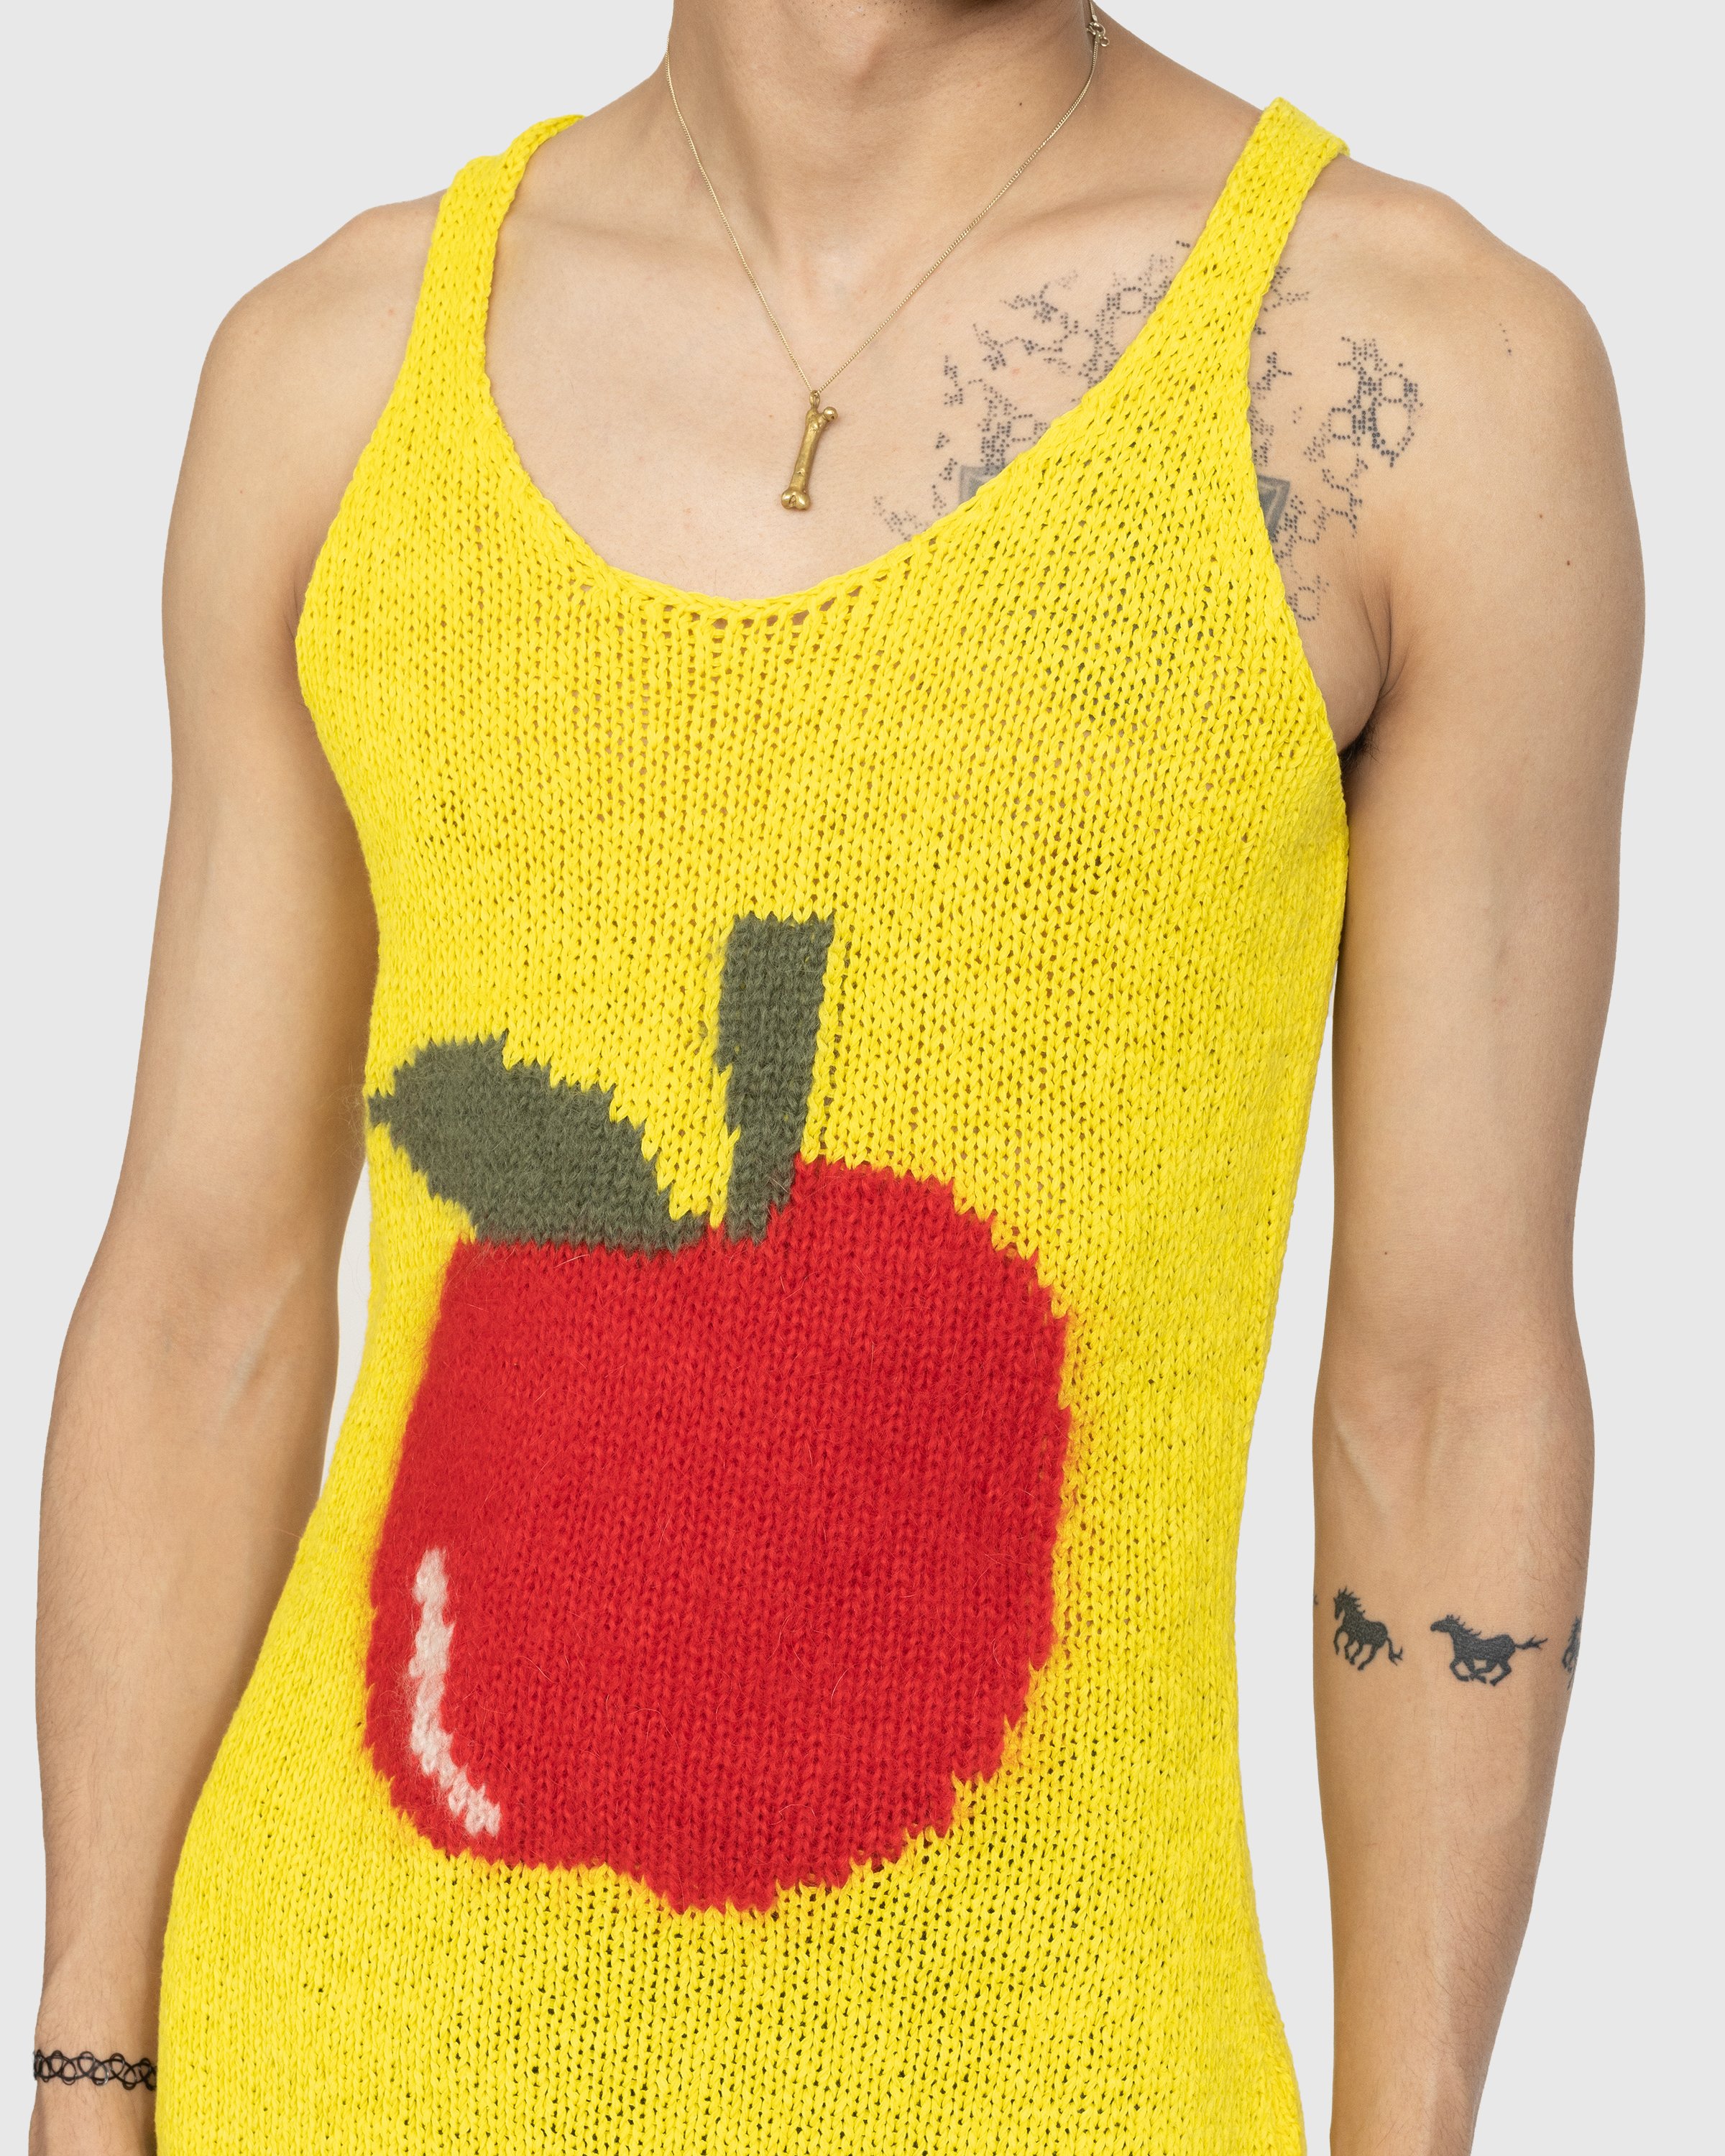 J.W. Anderson - Apple Tank Top Yellow - Clothing - Yellow - Image 4